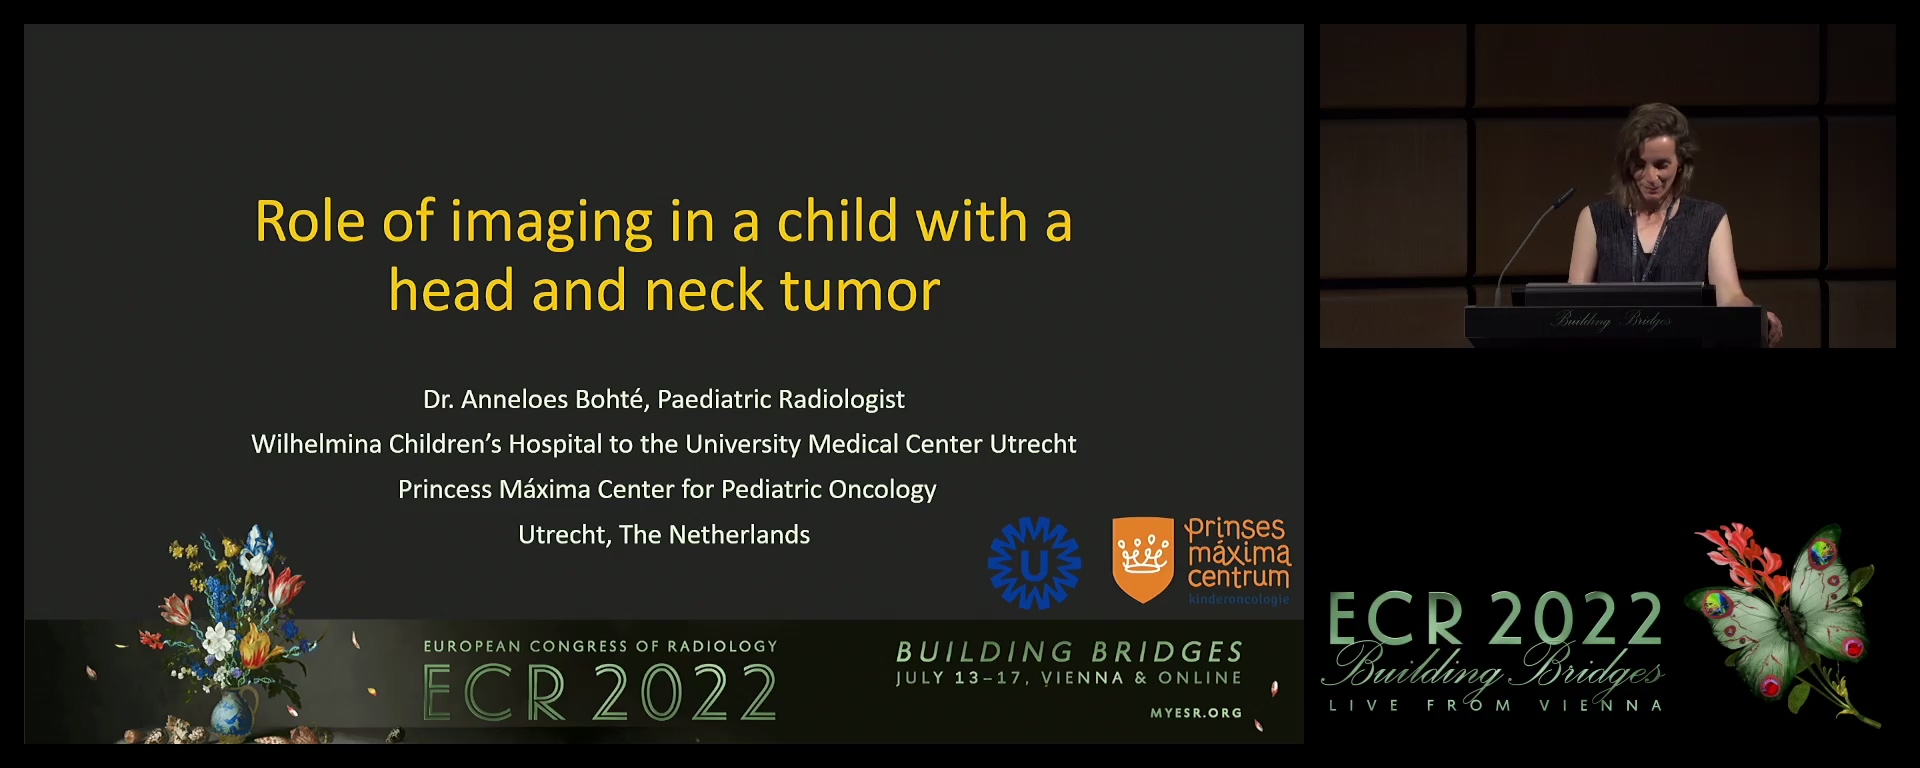 Role of imaging in a child with a head and neck tumour